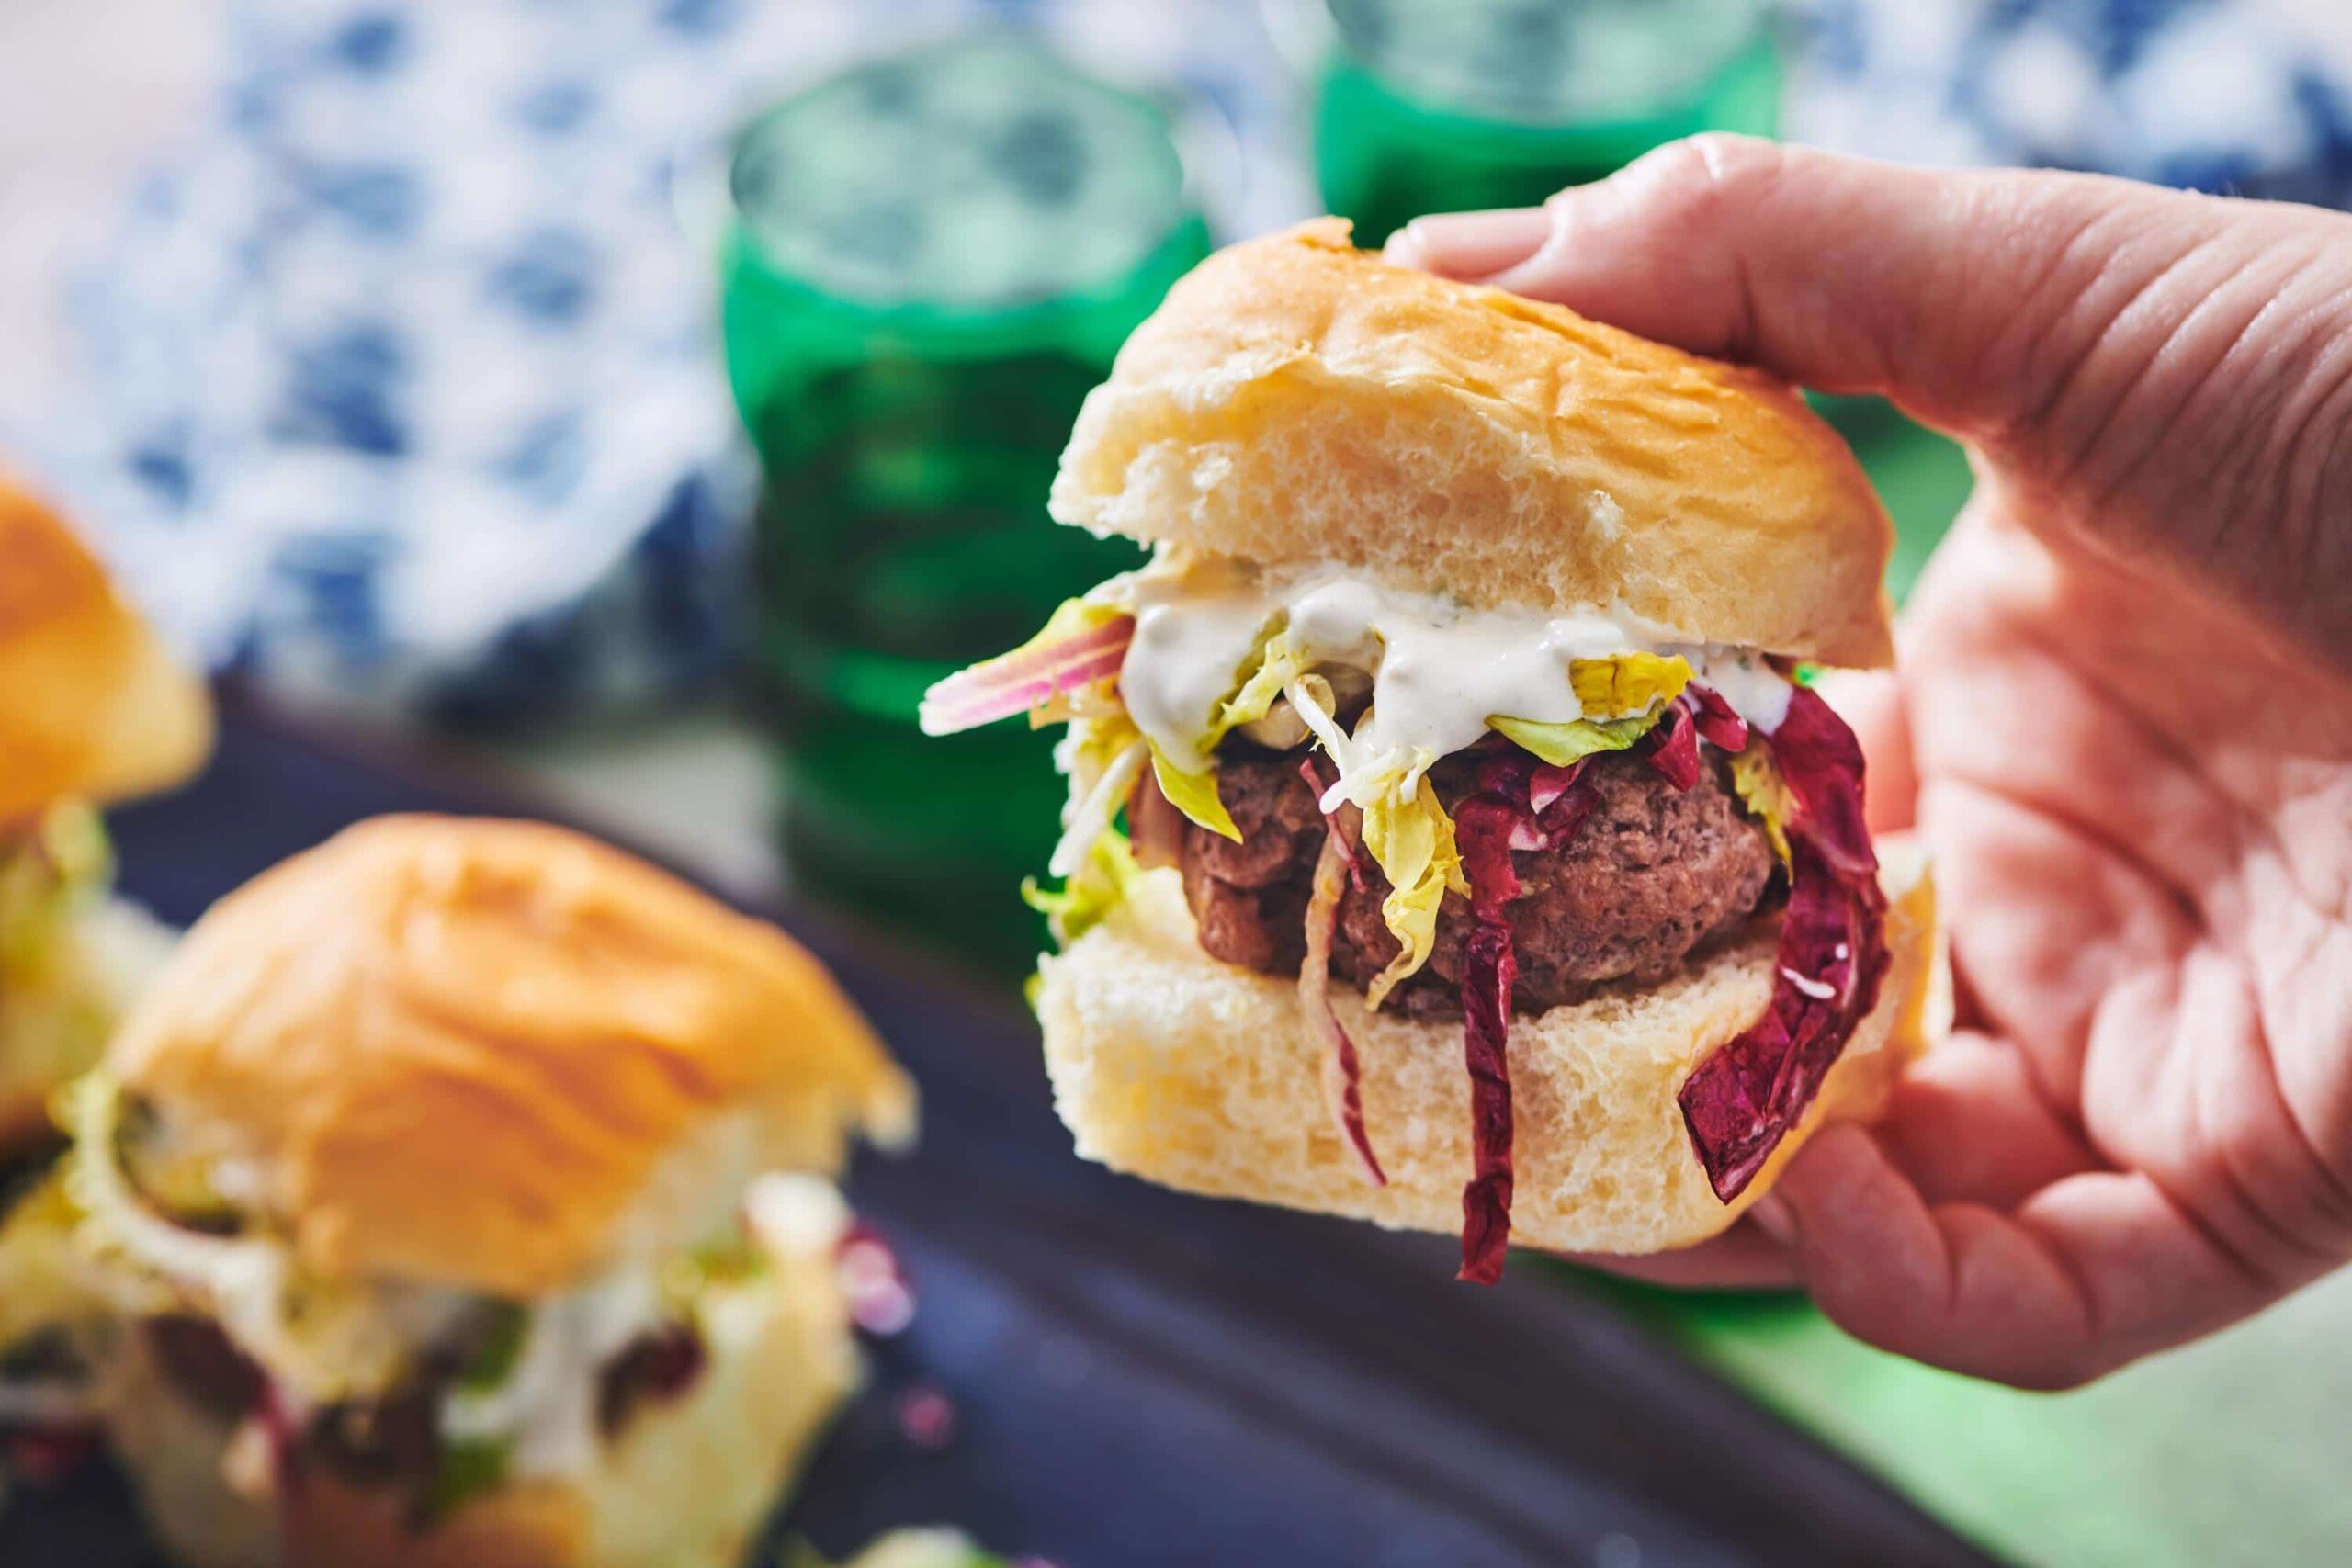 Person holding Chipotle Slider with slaw and blue cheese over table.